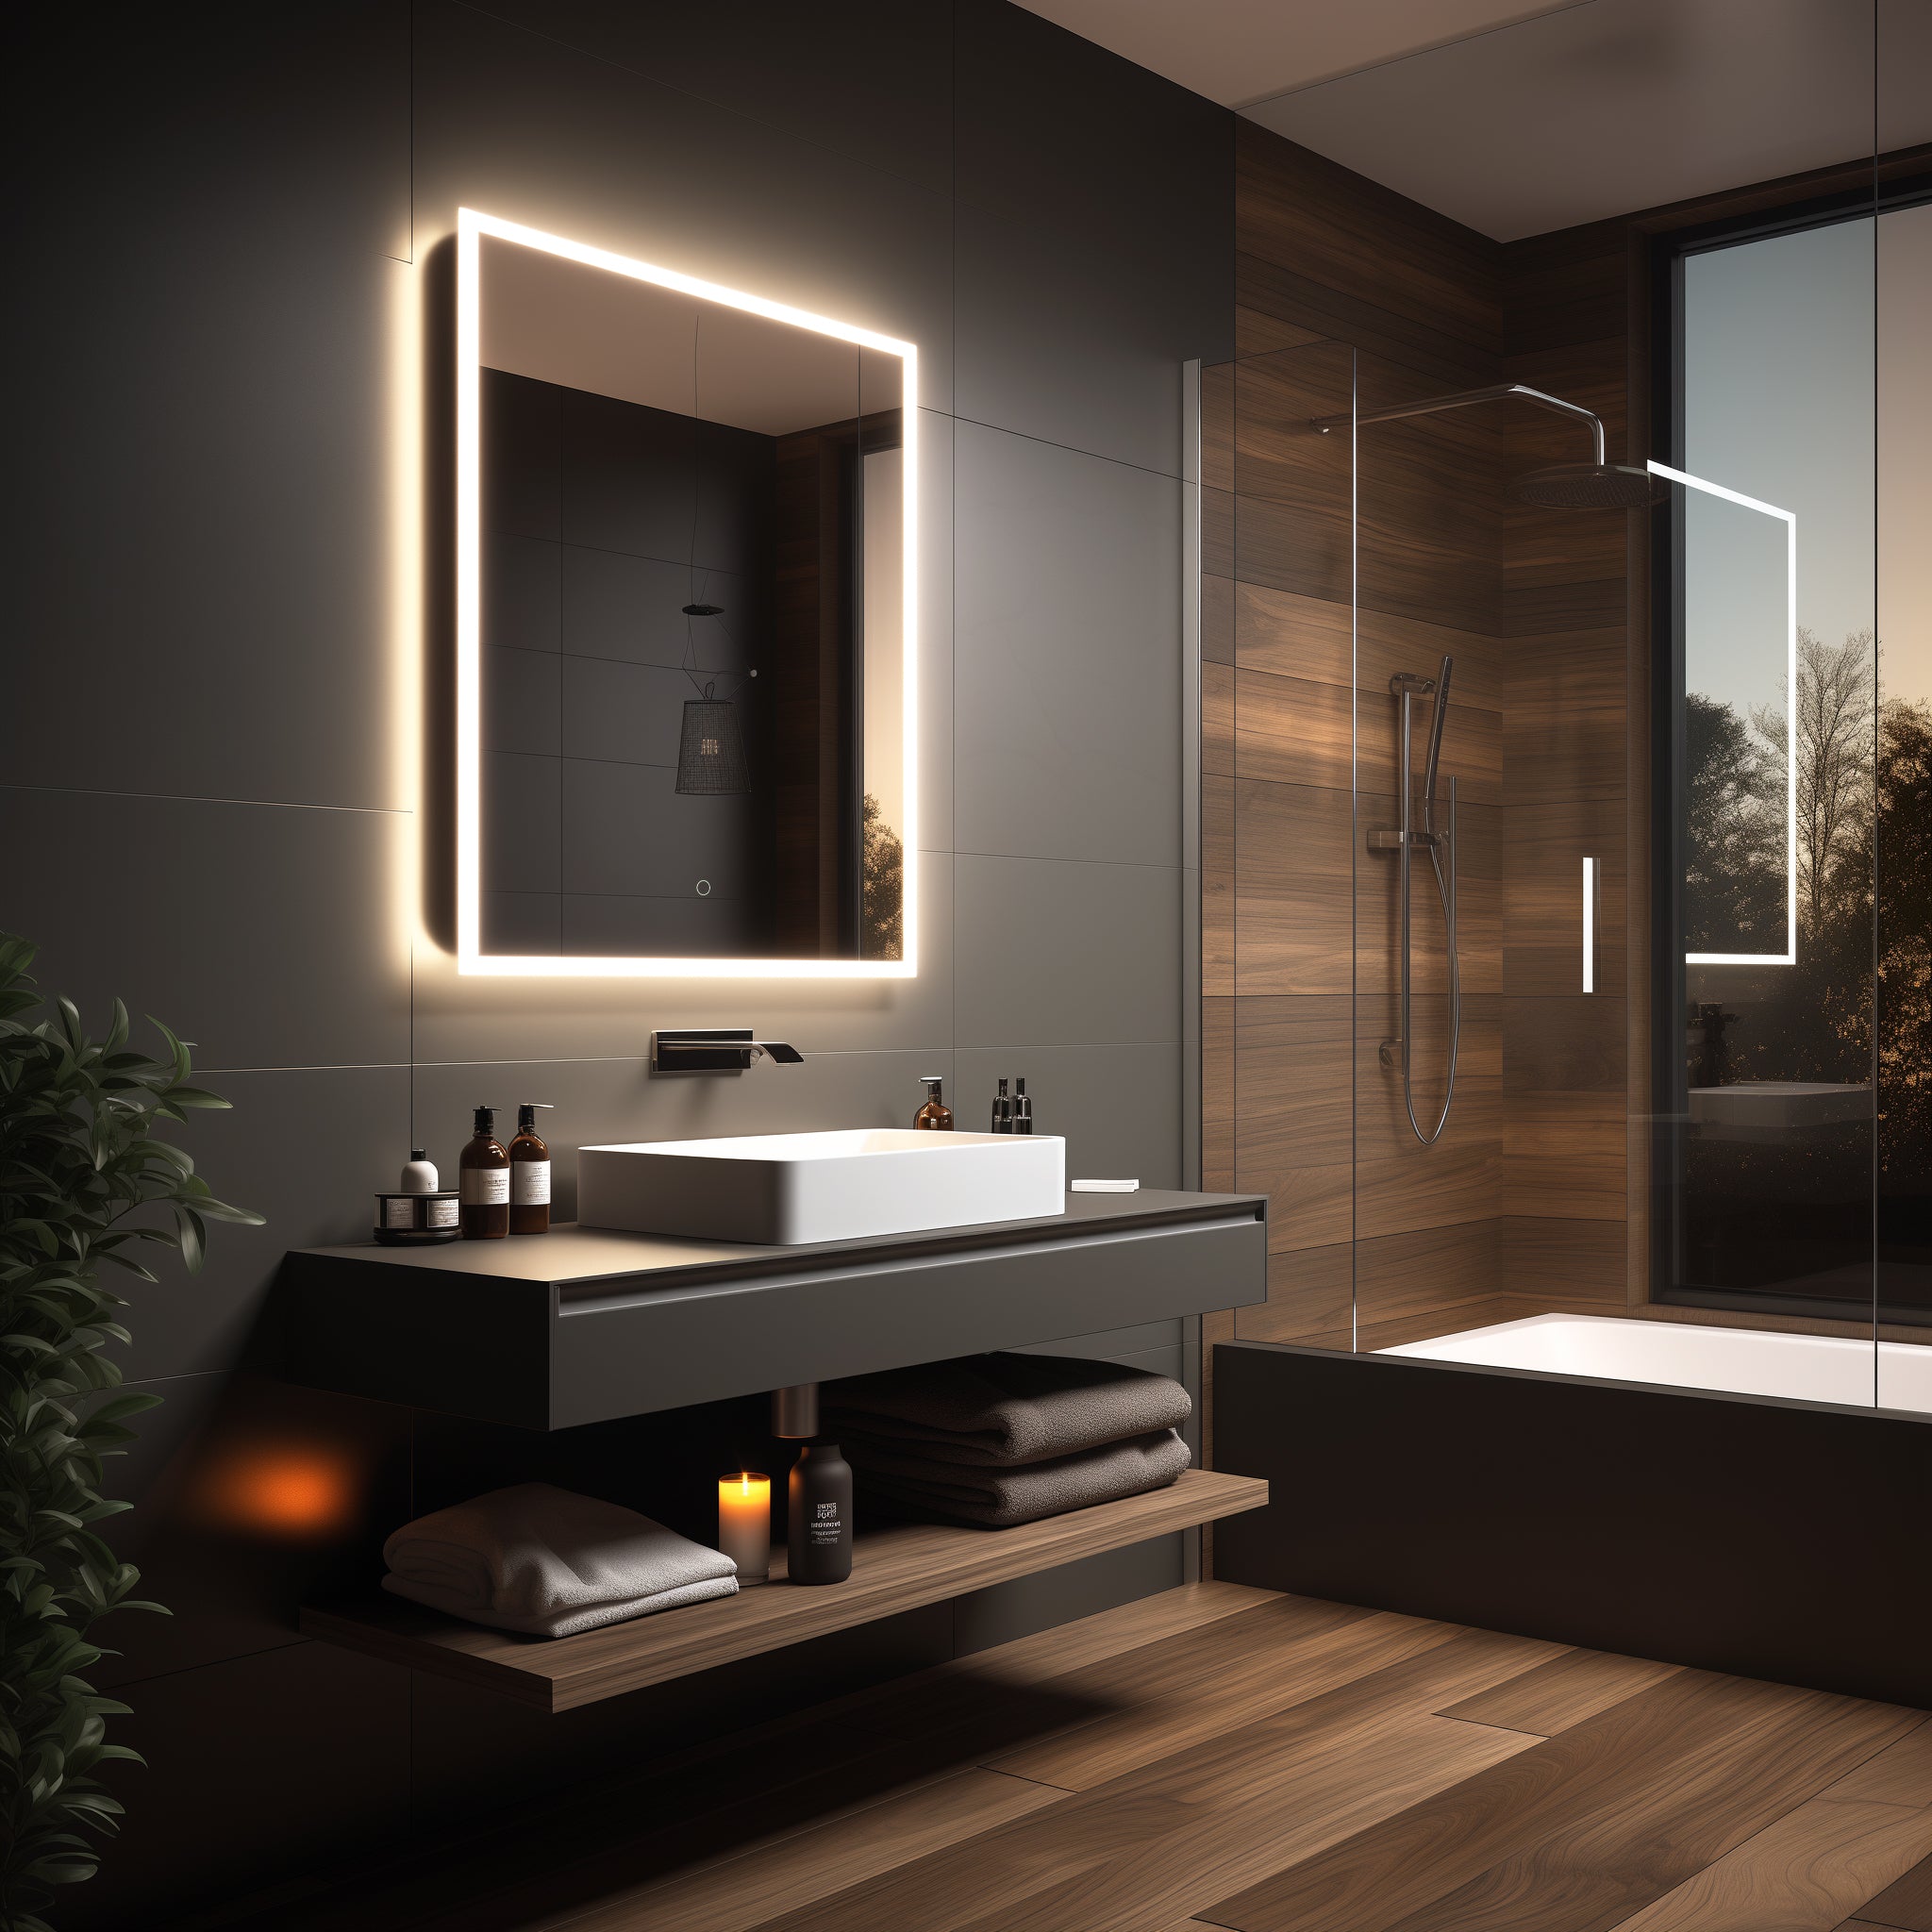 Modern bathroom with elegant ambient LED lights featuring a floating vanity, backlit mirror, spacious walk-in shower, and warm wood accents.